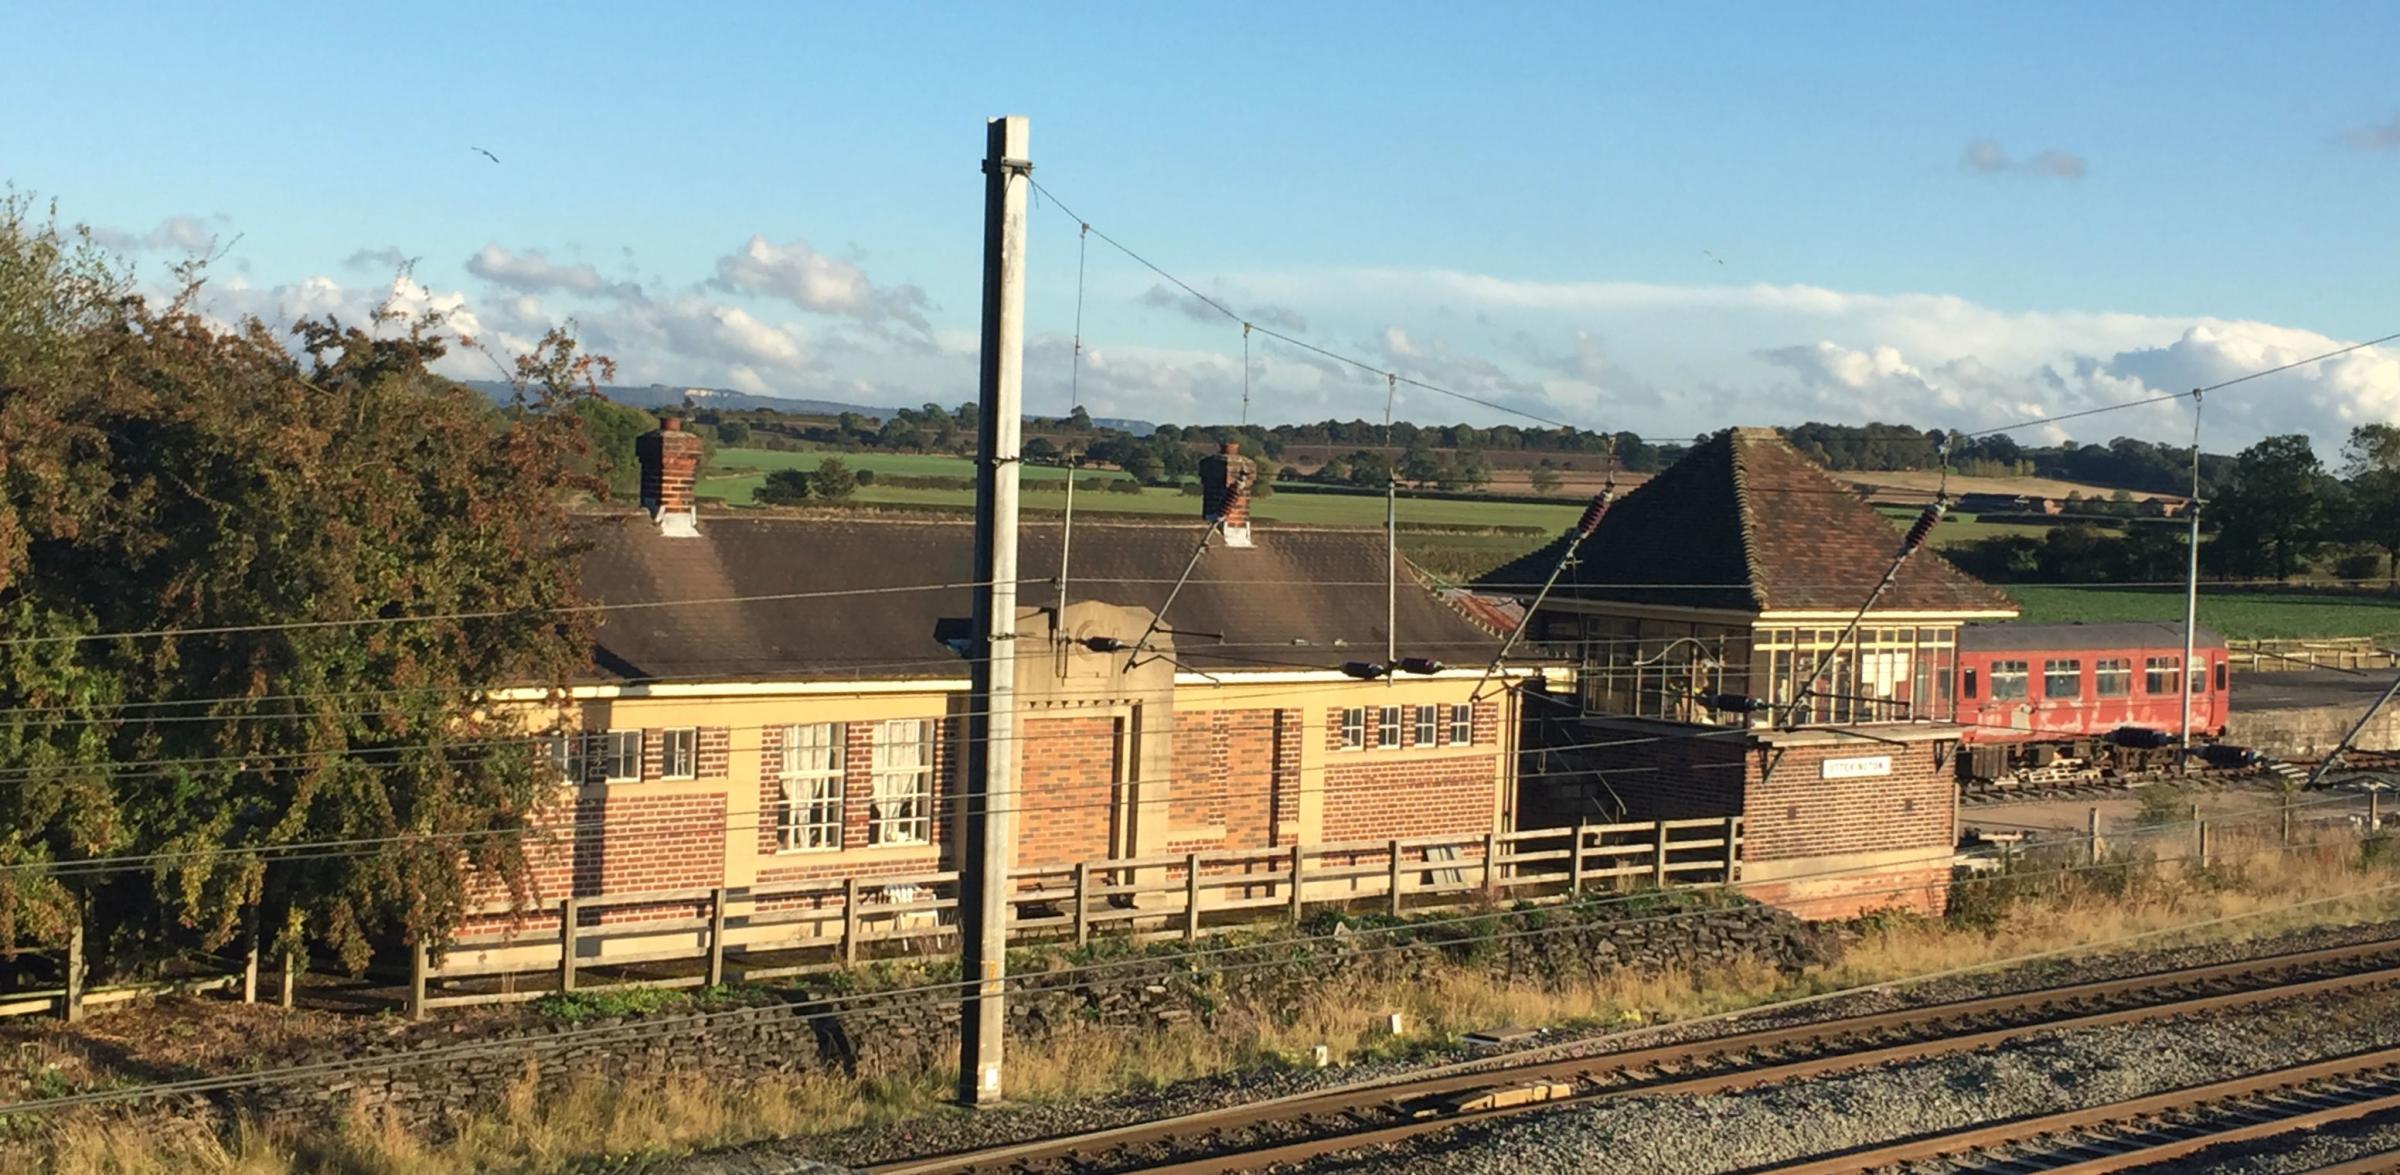 Otterington station and signalbox, where James Holmes sought help after Rosa died, but was told there was no one to work his shift